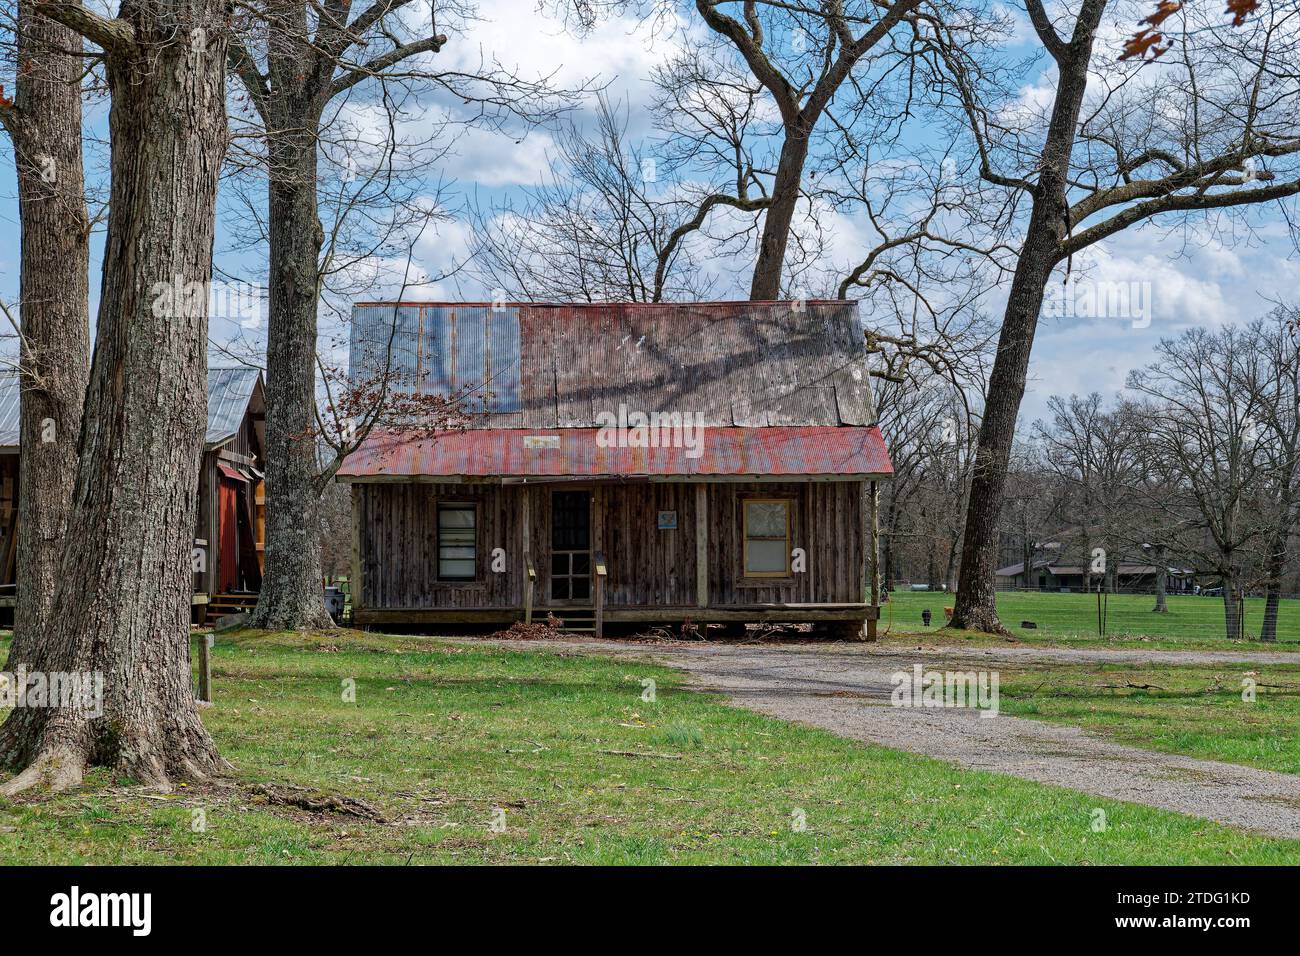 Old rundown rustic home with a rusty metal roof and a porch surrounded by trees and farmland with cows in the background in a country setting on a sun Stock Photo